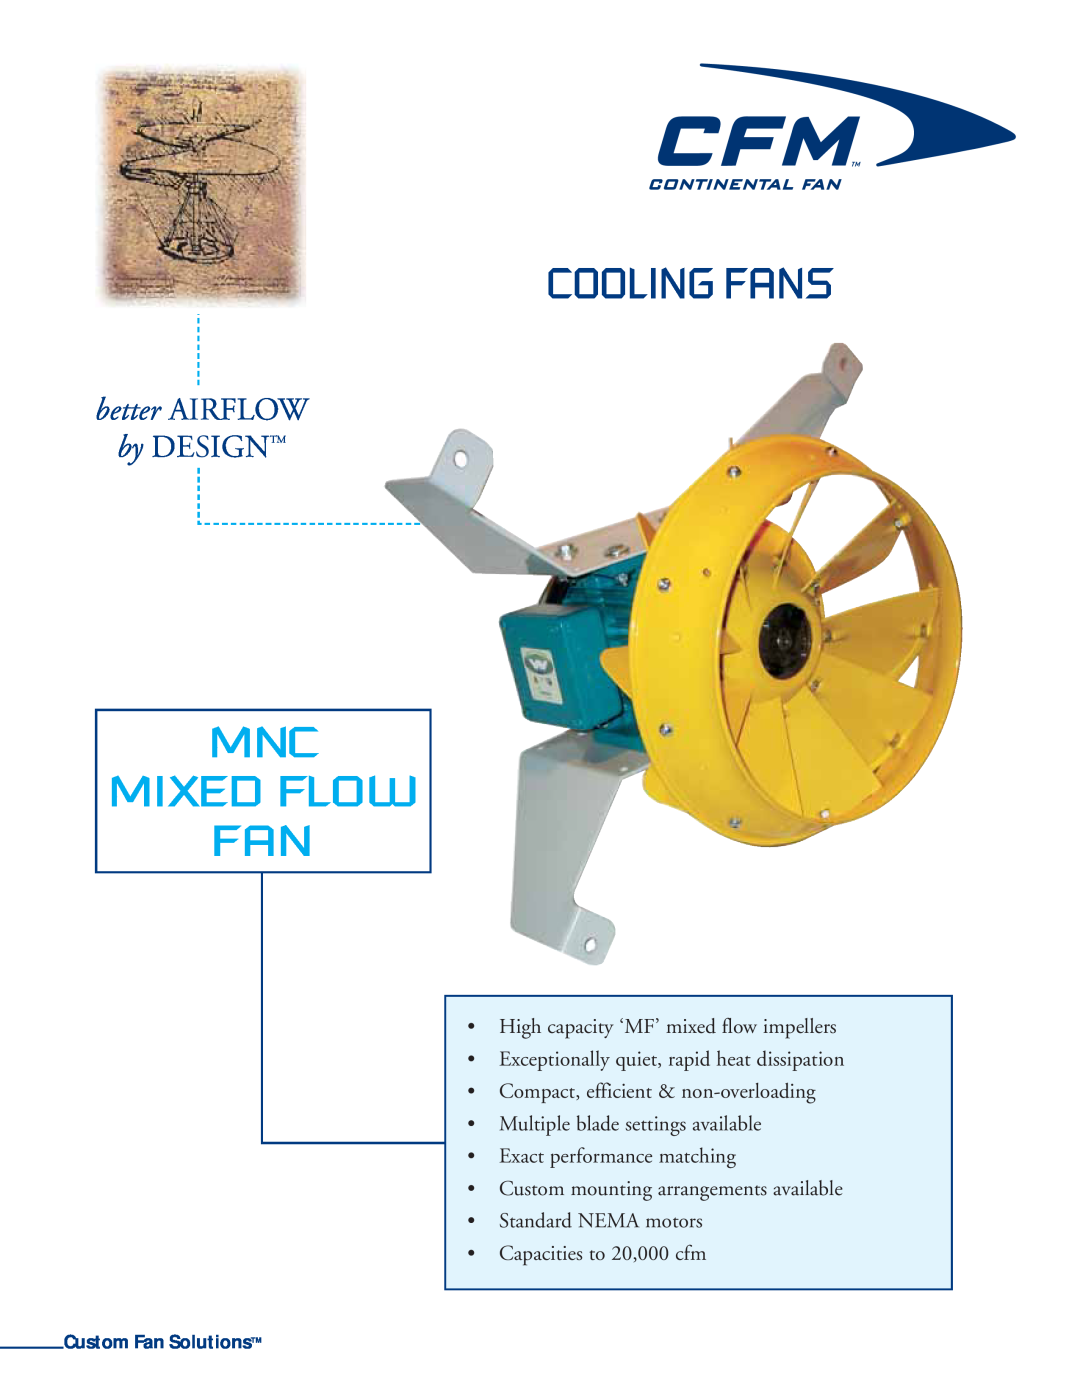 CFM MNC-800 manual Cooling Fans, Mnc Mixed Flow Fan, better AIRFLOW, by DESIGNTM, High capacity ‘MF’ mixed flow impellers 